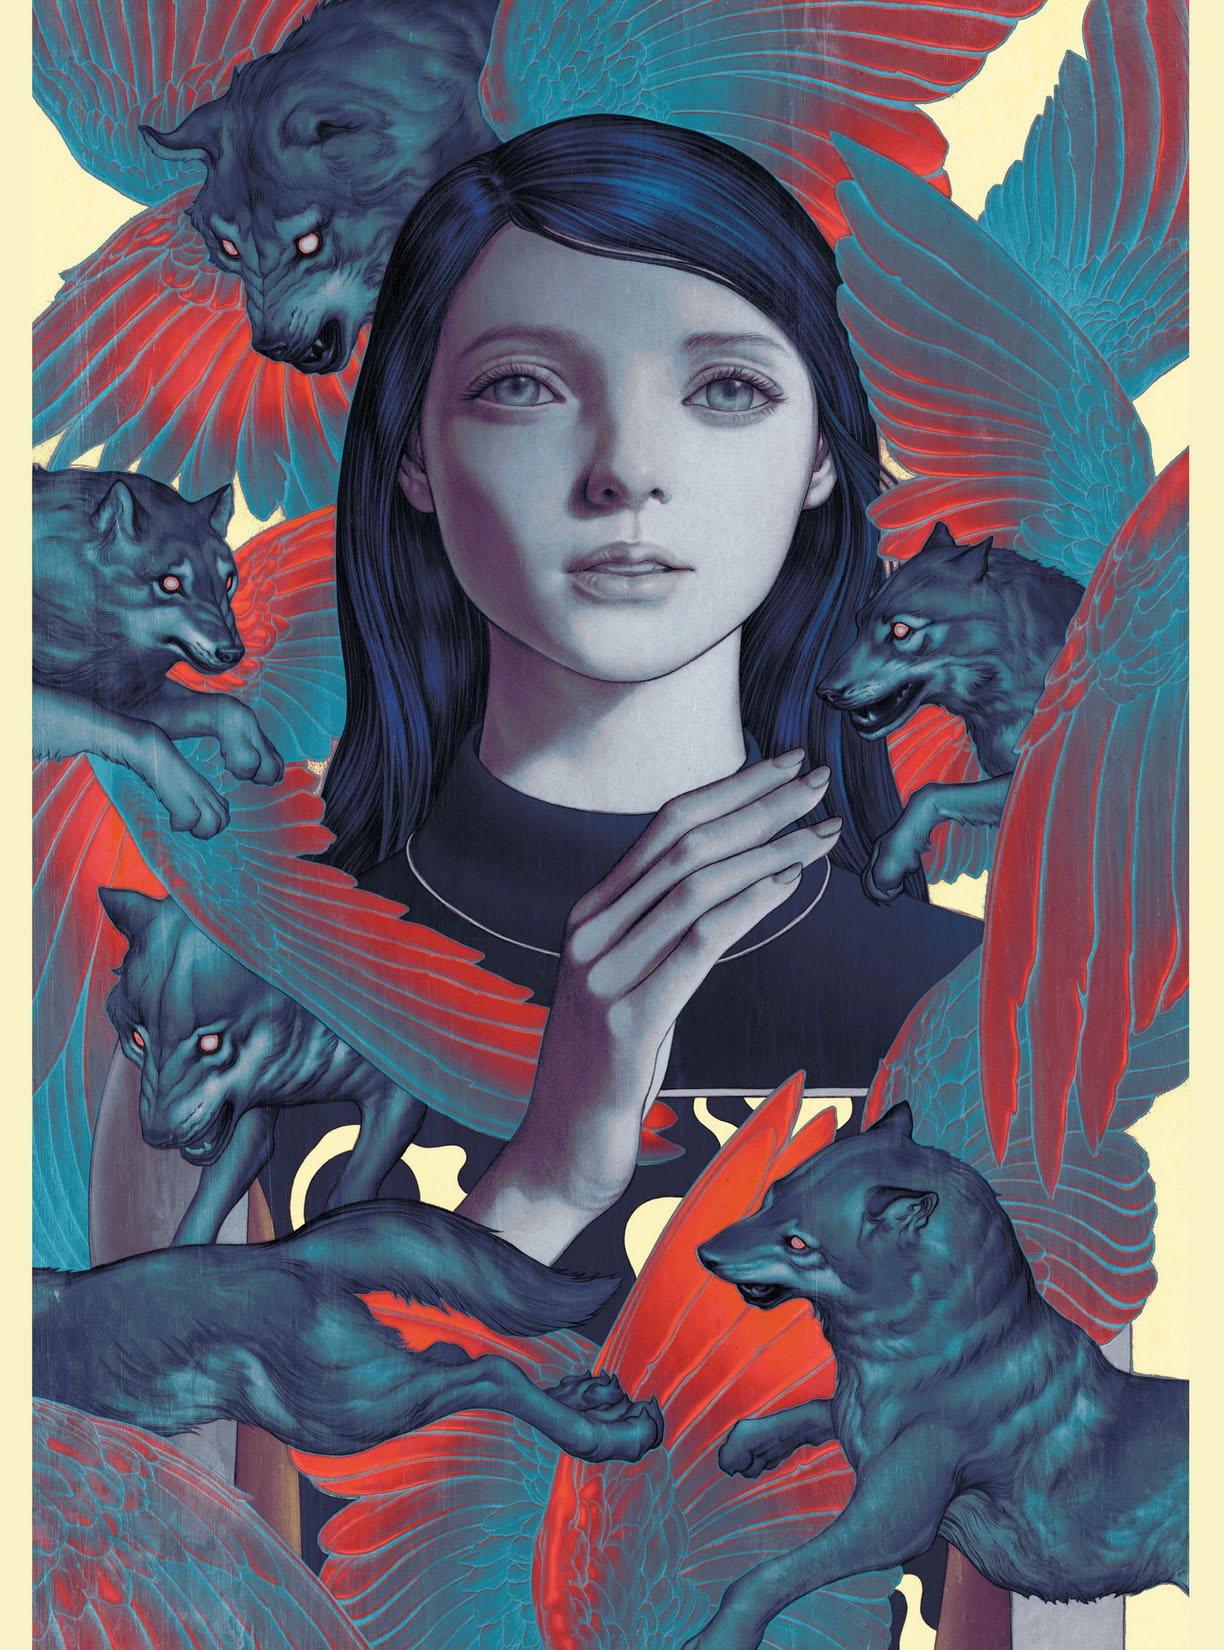 Fables Covers: The Art of James Jean (New Edition) preview images